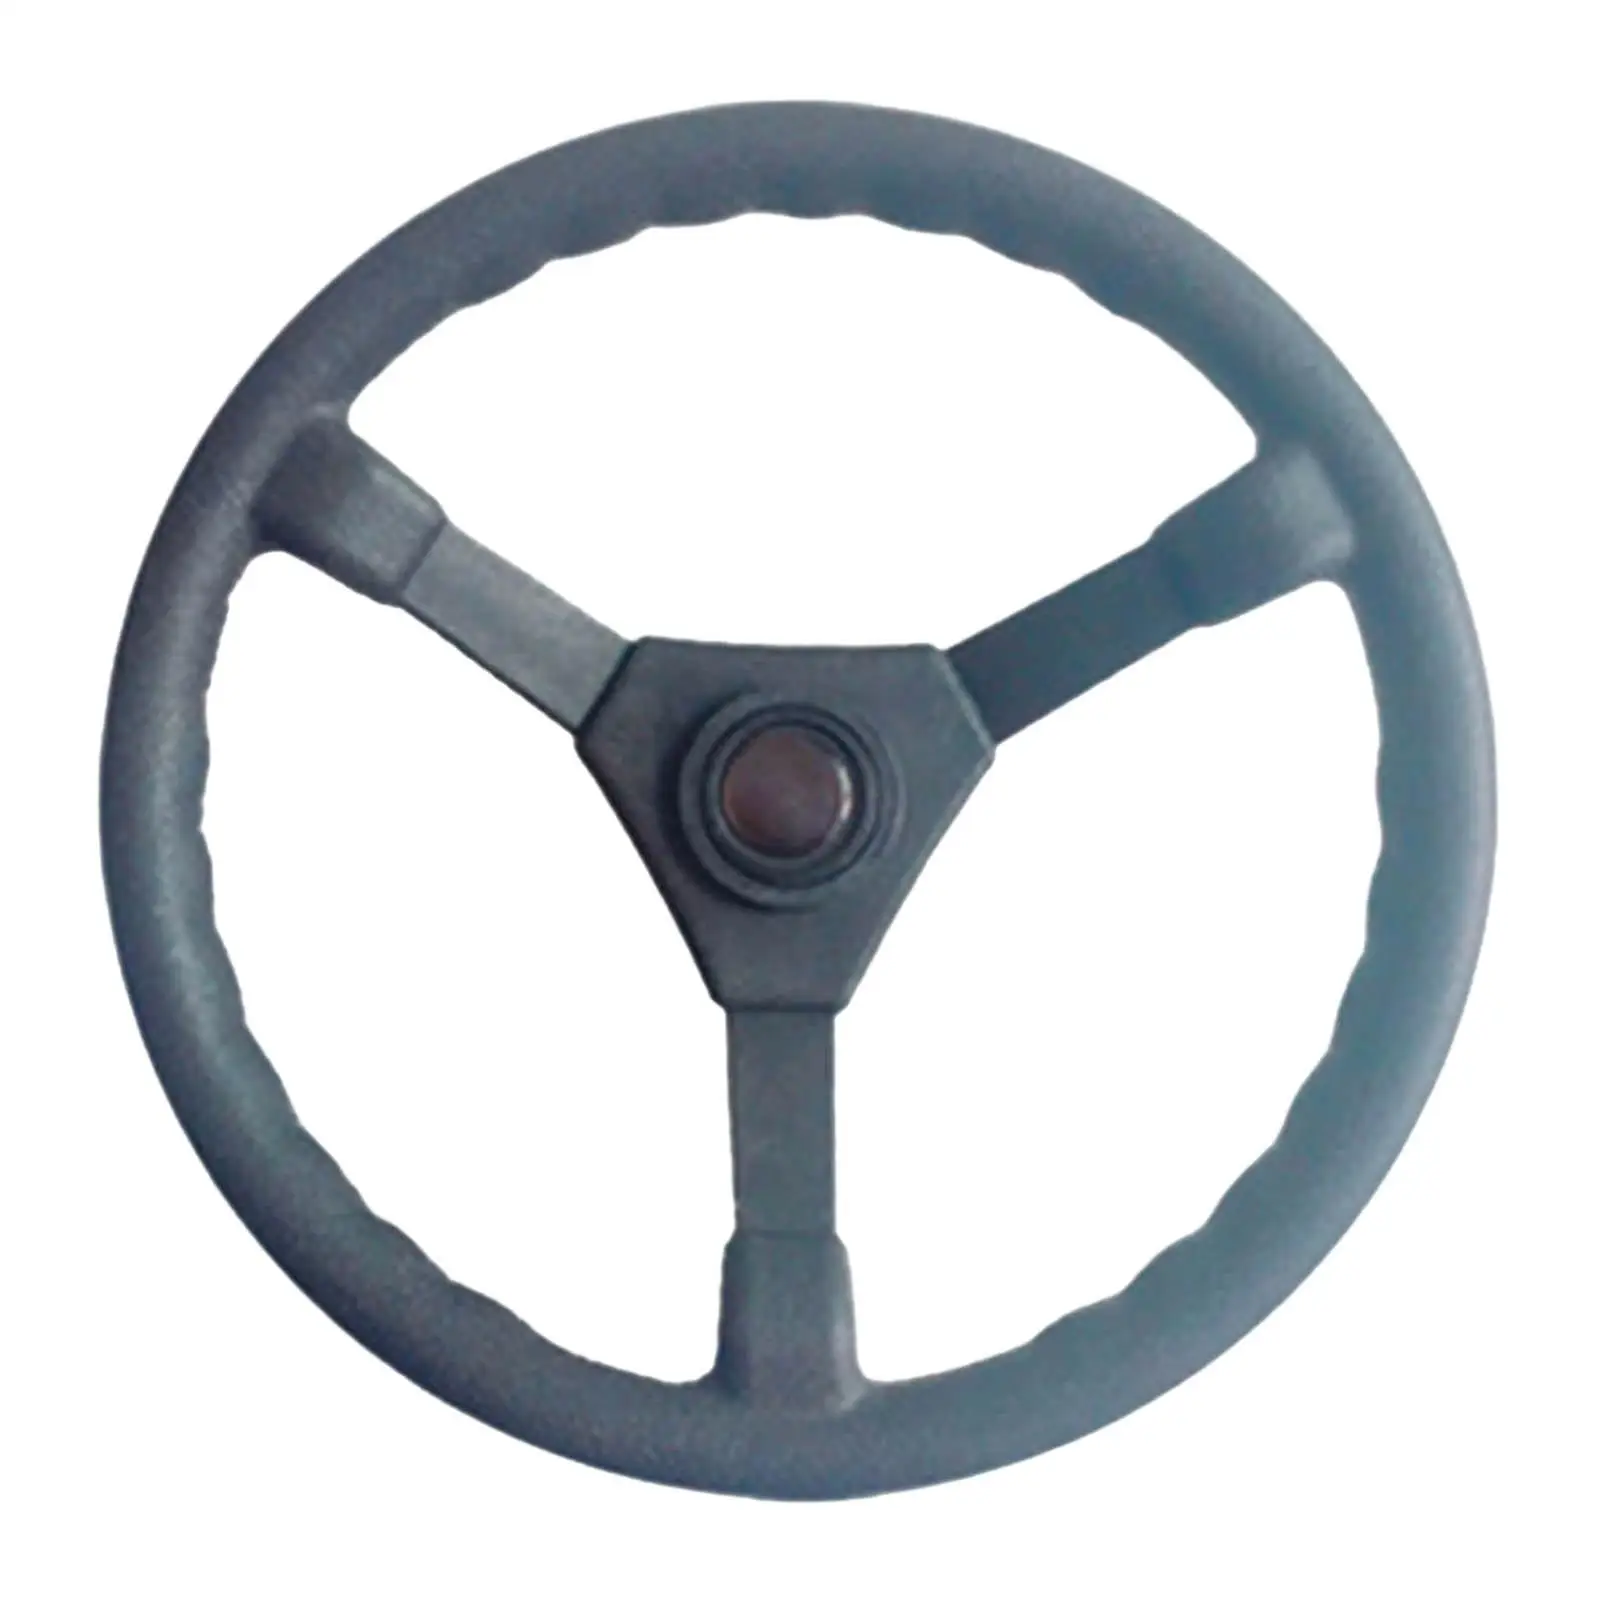 Boat Steering Wheel Replace Outboard Steering System Control for Marine